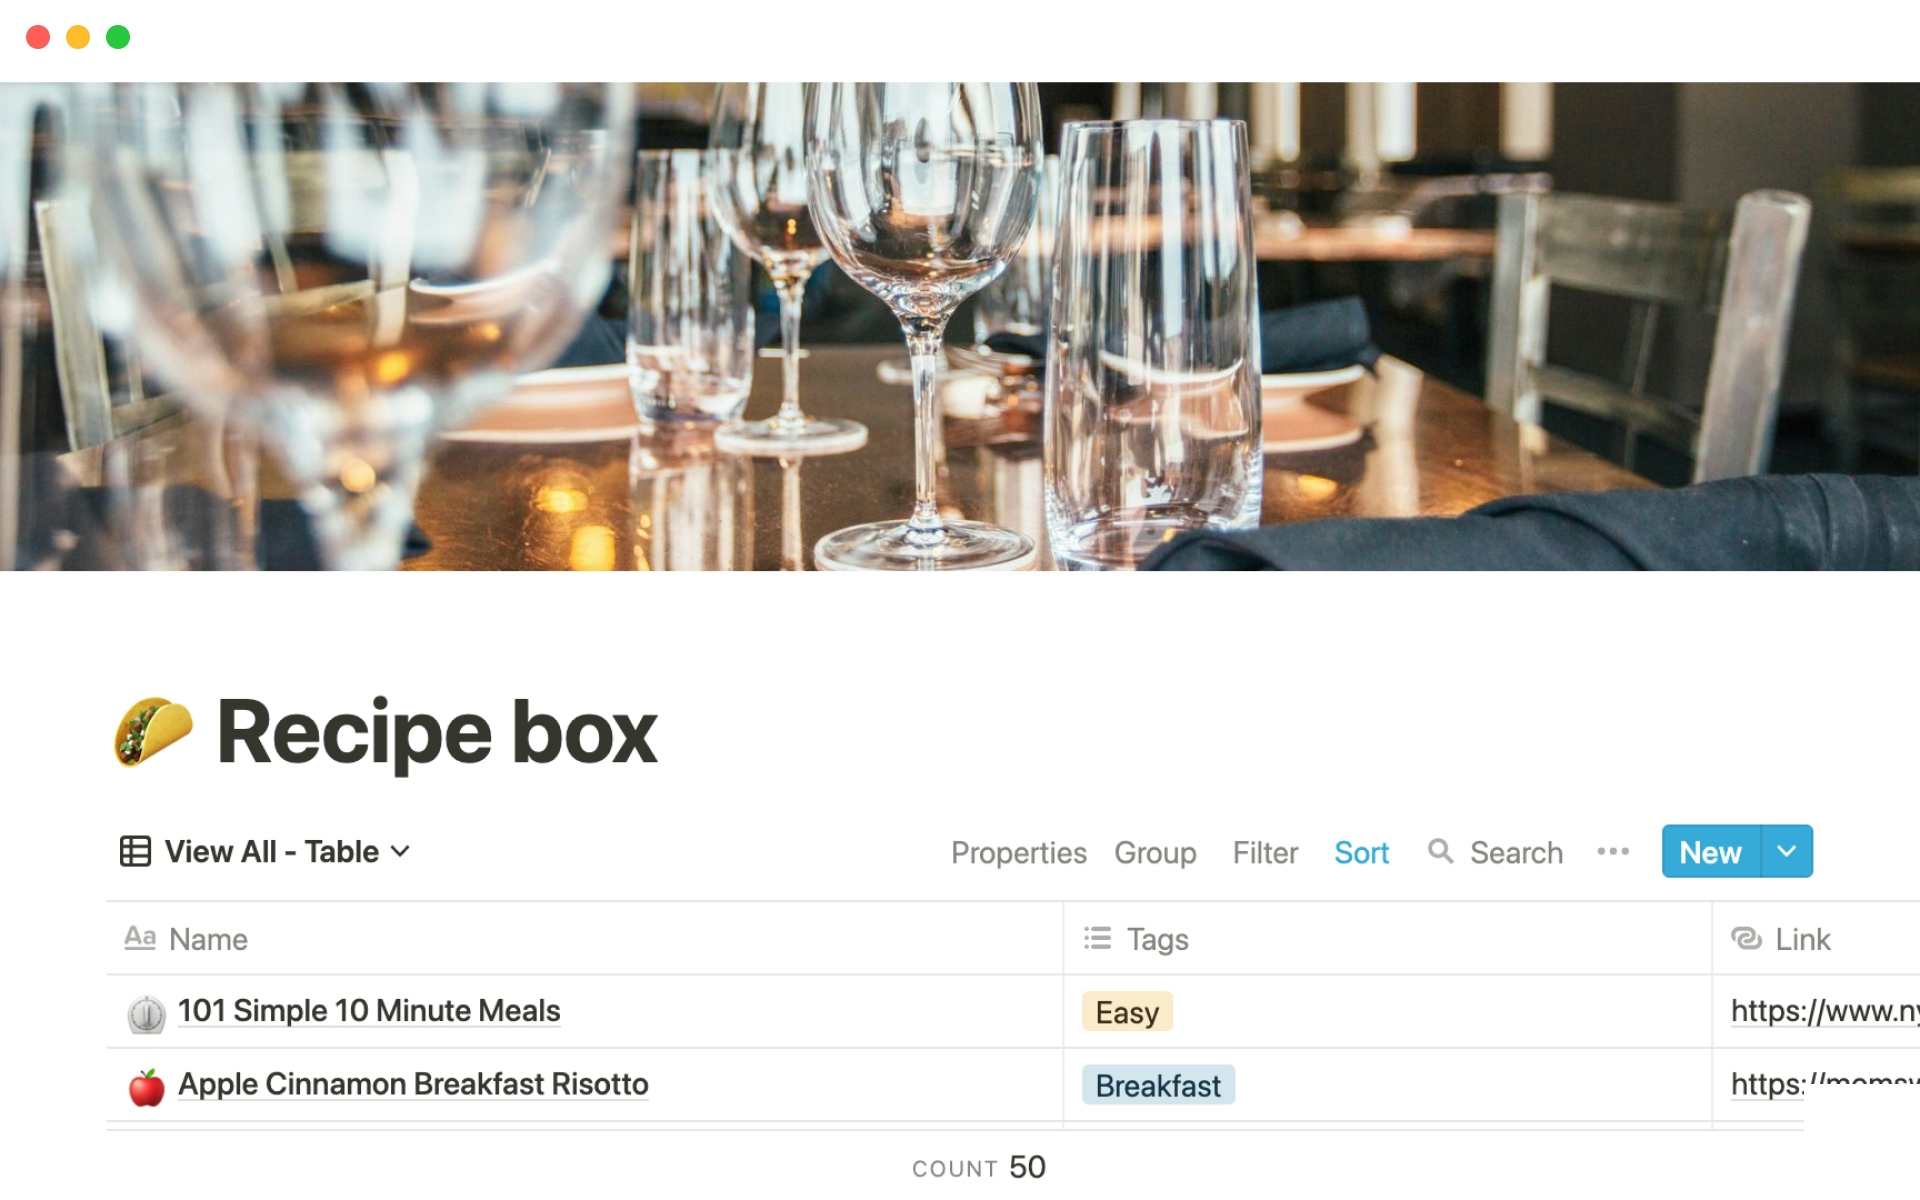 The desktop image for the Recipe box template